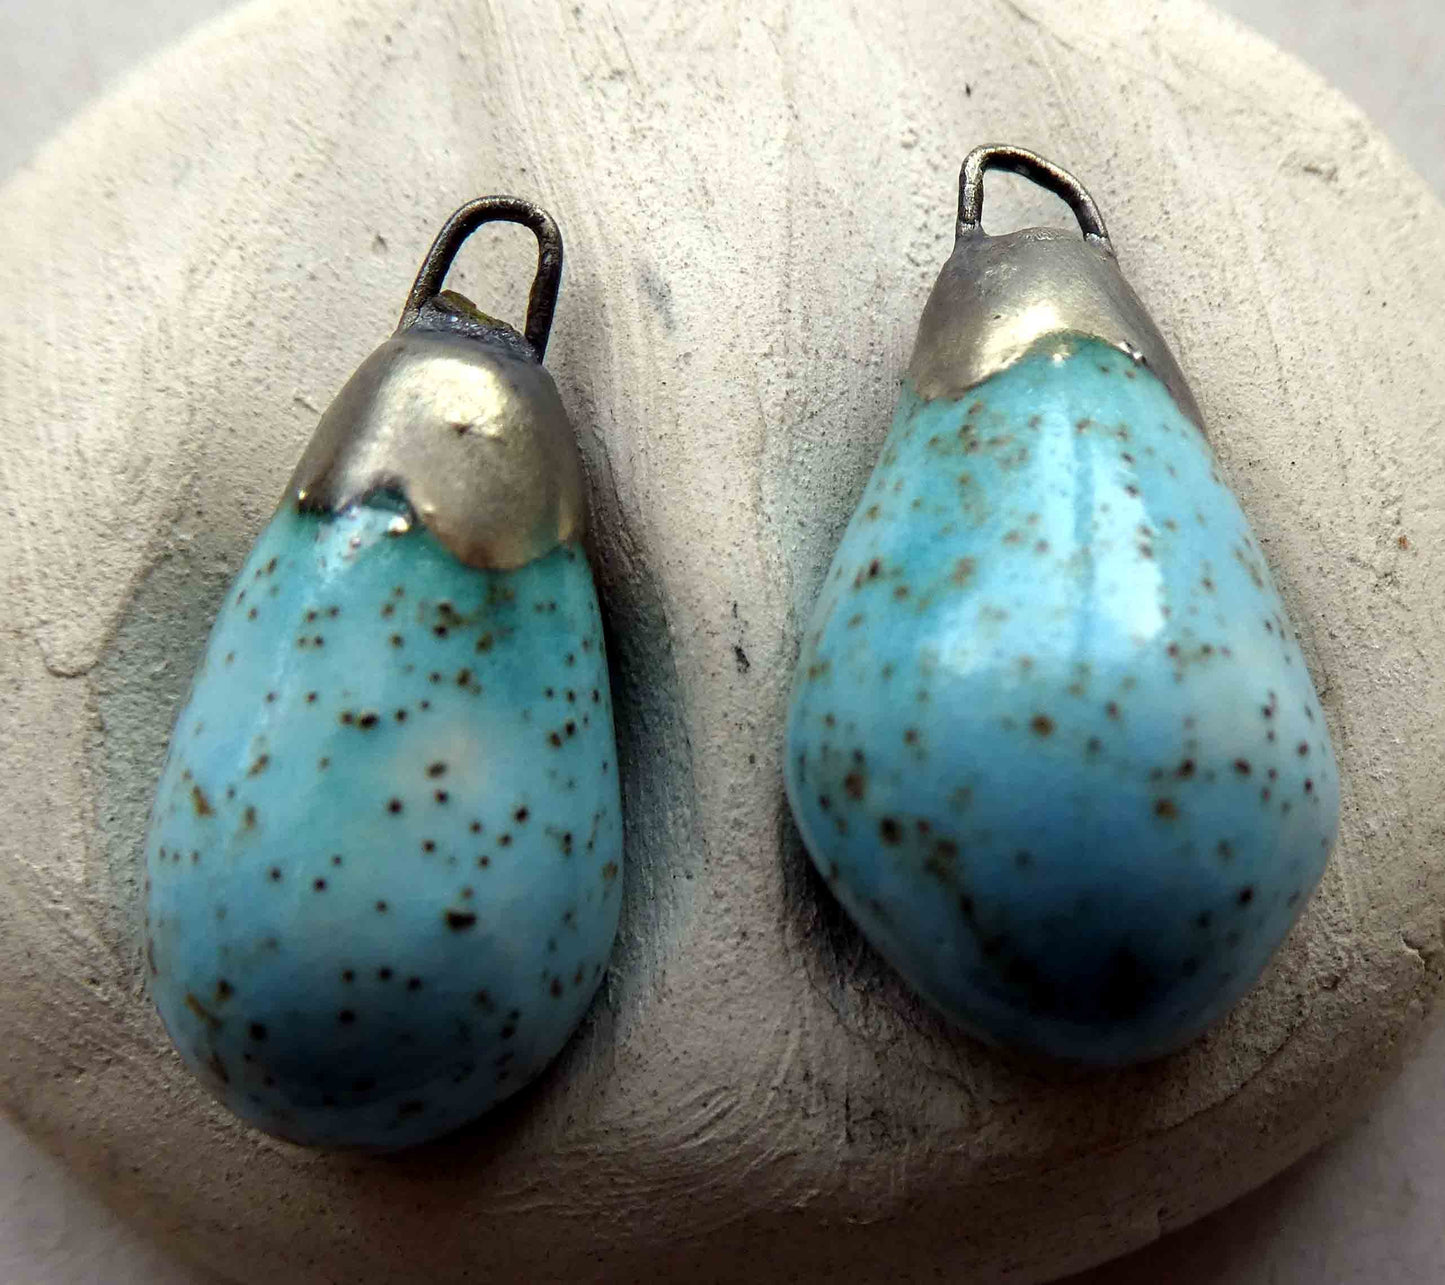 Ceramic Bronzy Droplet Earring Charms - Turquoise Sandstone